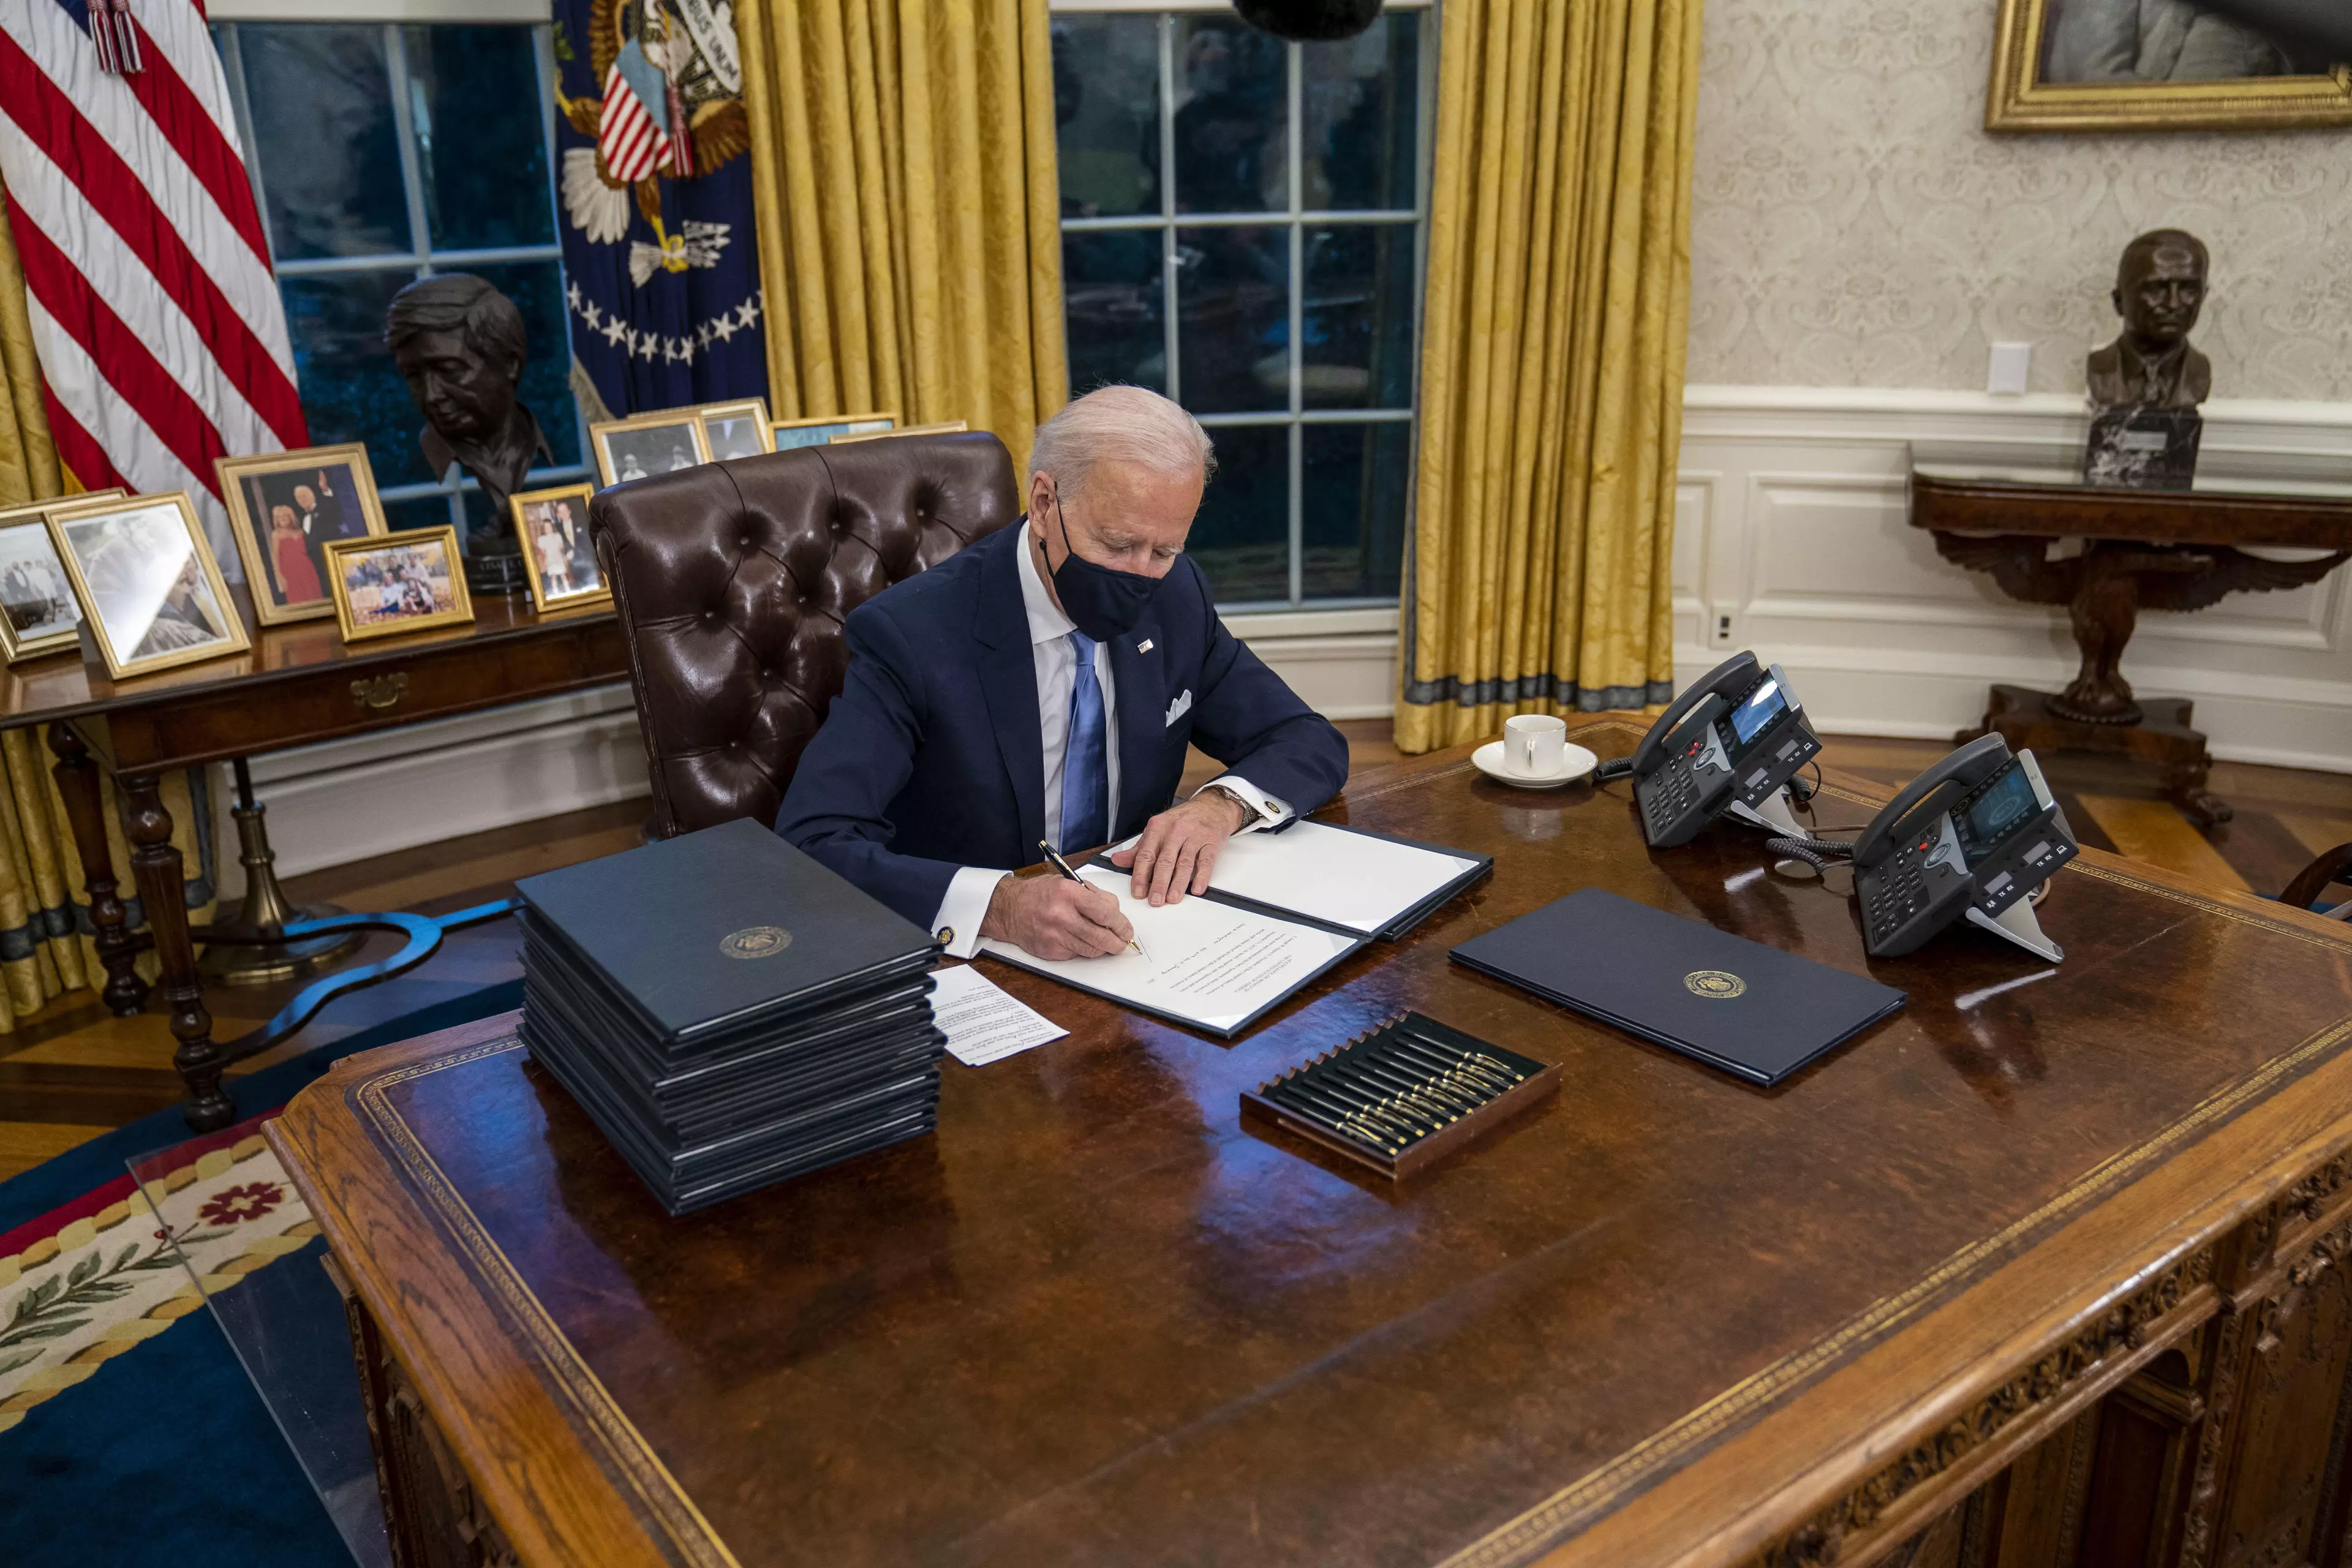 Biden wasted no time rejoining the Paris Climate Agreement (